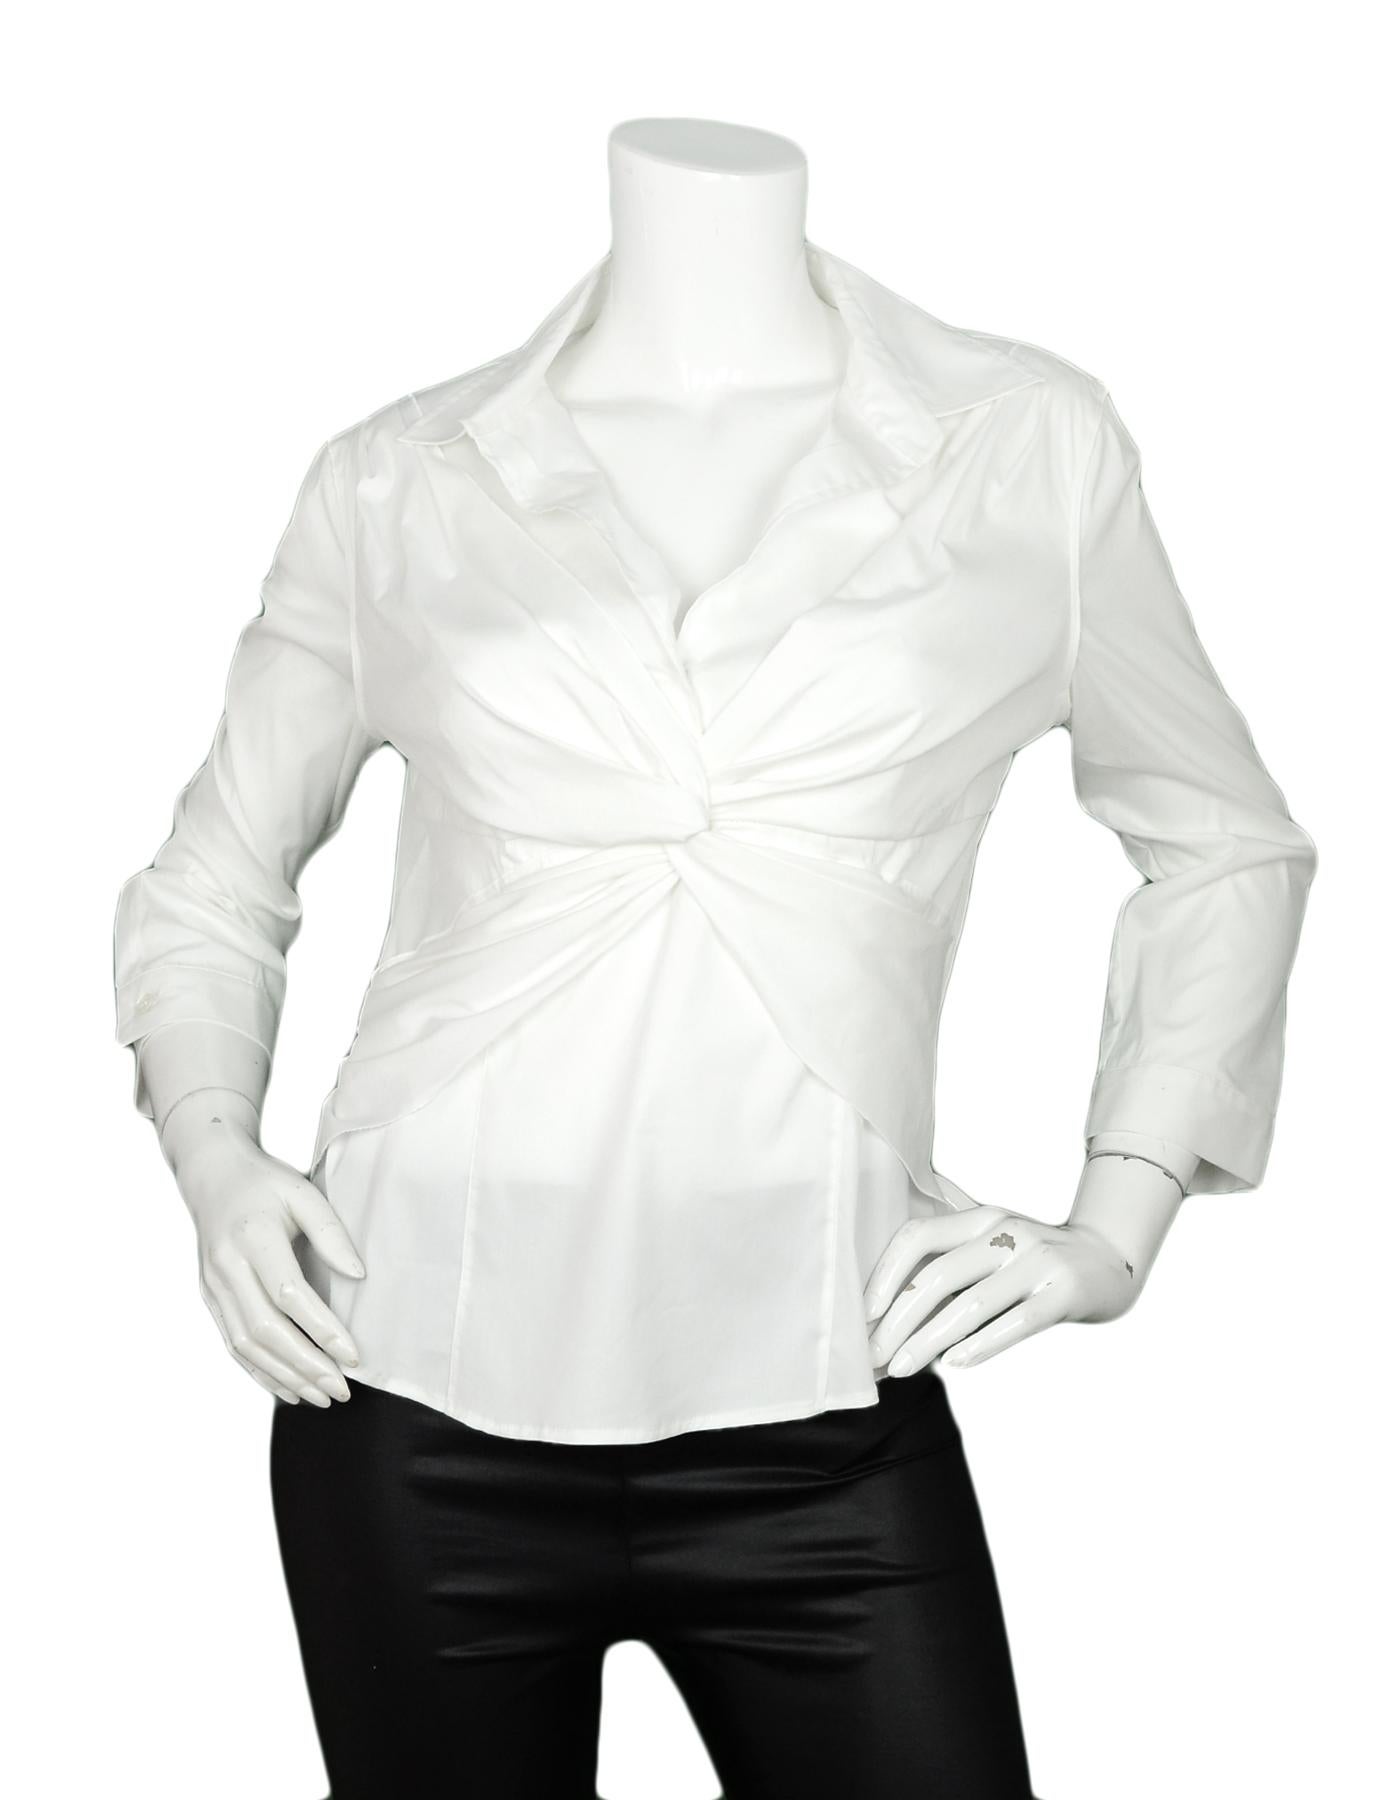 Prada White Cotton Blend Criss-Cross Front Blouse sz IT 46

Made In: Italy
Color: White
Materials: 72% Cotton, 23% Nylon, 5% Elastane
Lining: 72% Cotton, 23% Nylon, 5% Elastane
Opening/Closure: Front buttons
Overall Condition: Excellent pre-owned